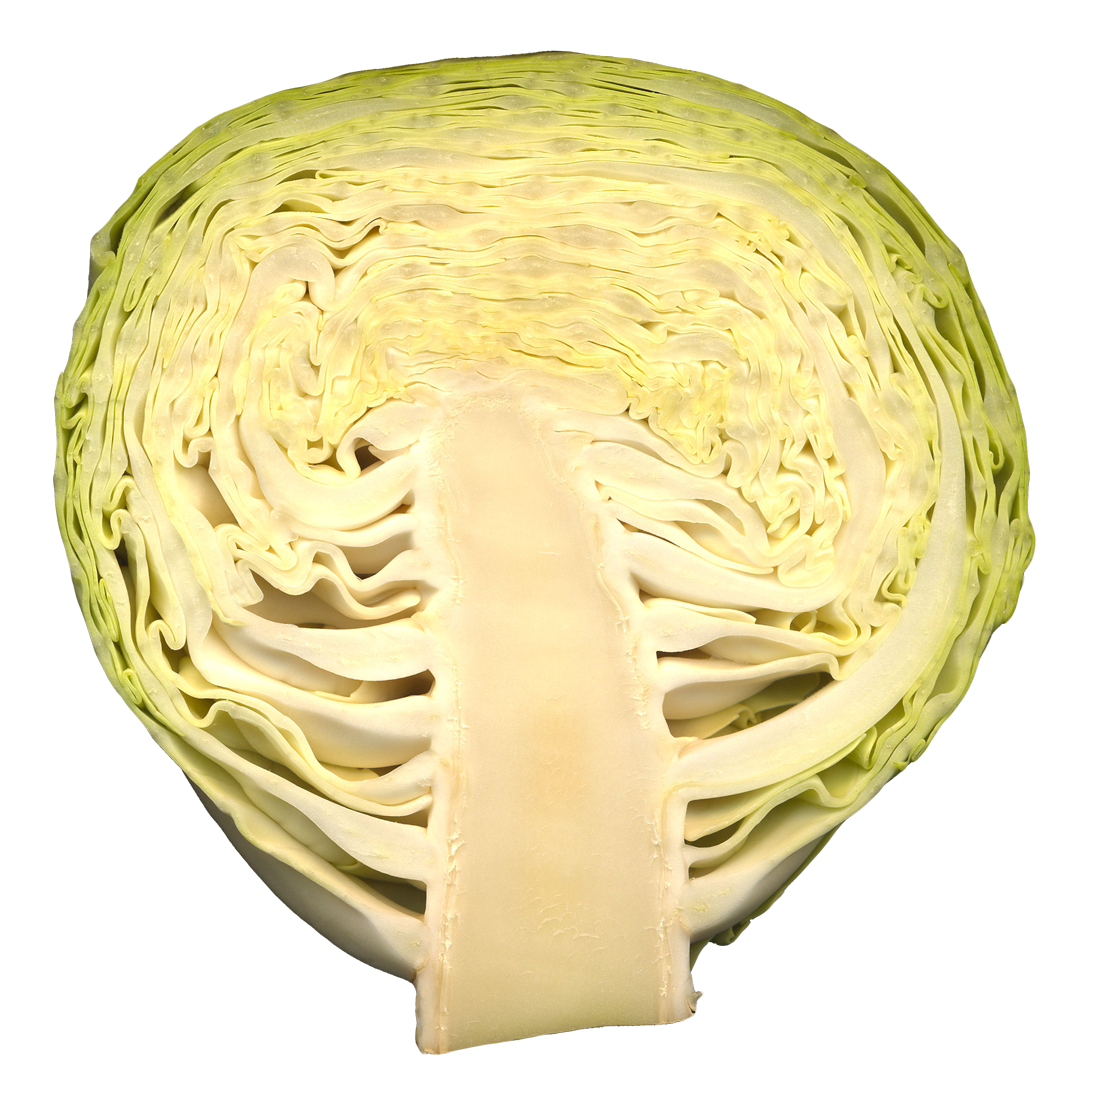 A Close Up Of A Cabbage